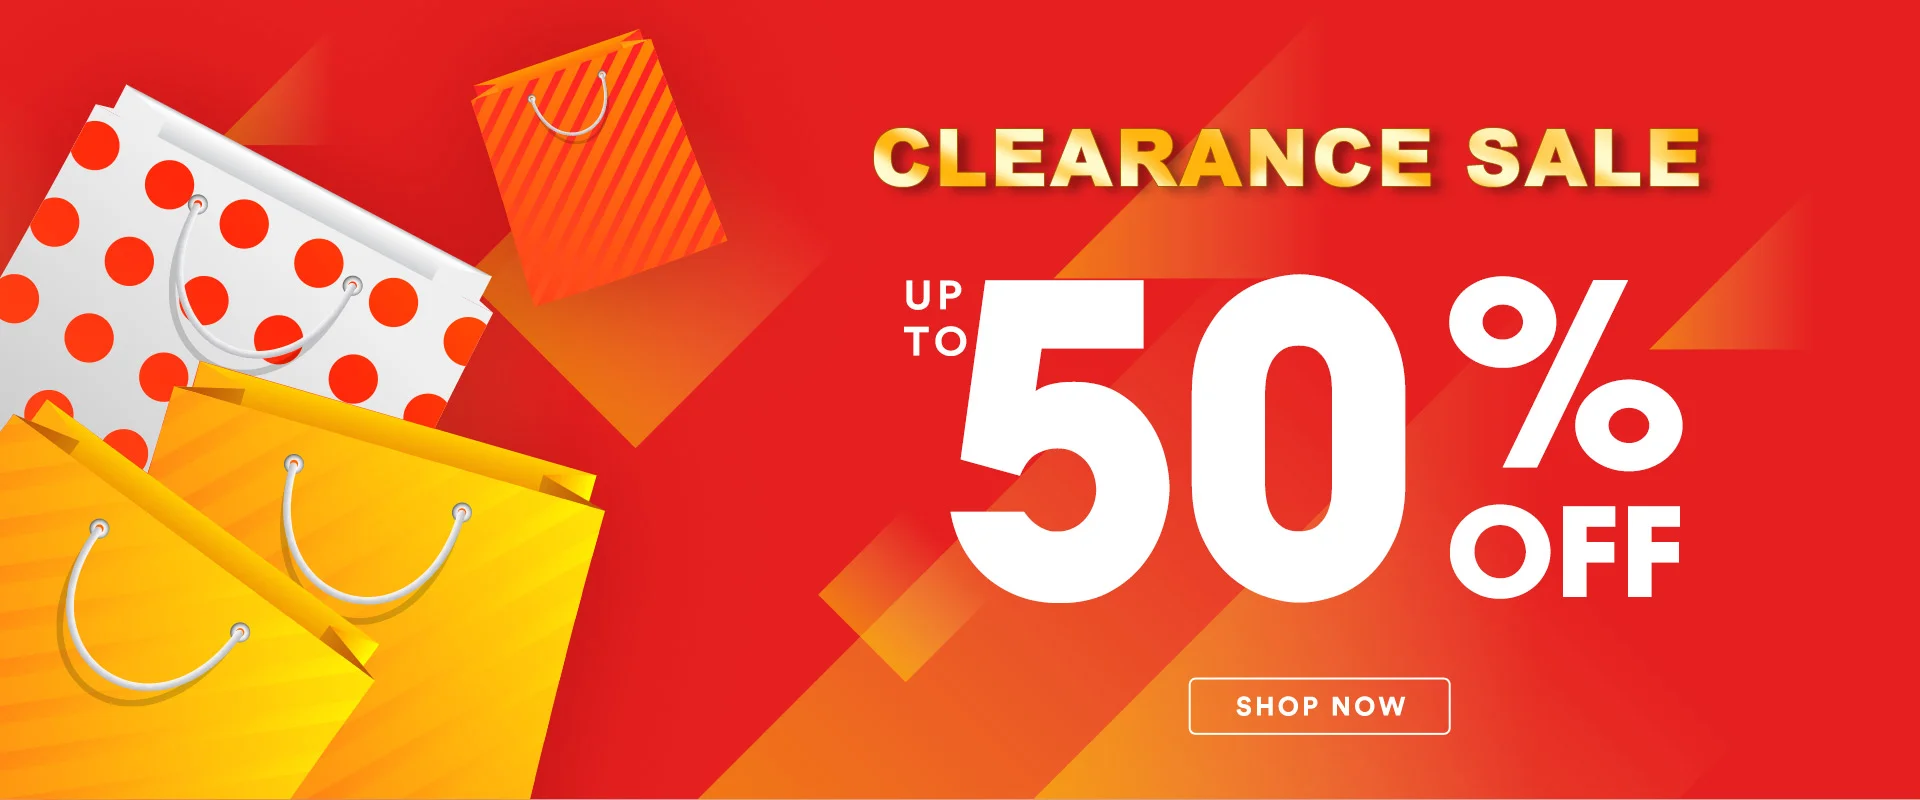 Cheap Elevator Shoes Clearance Sale